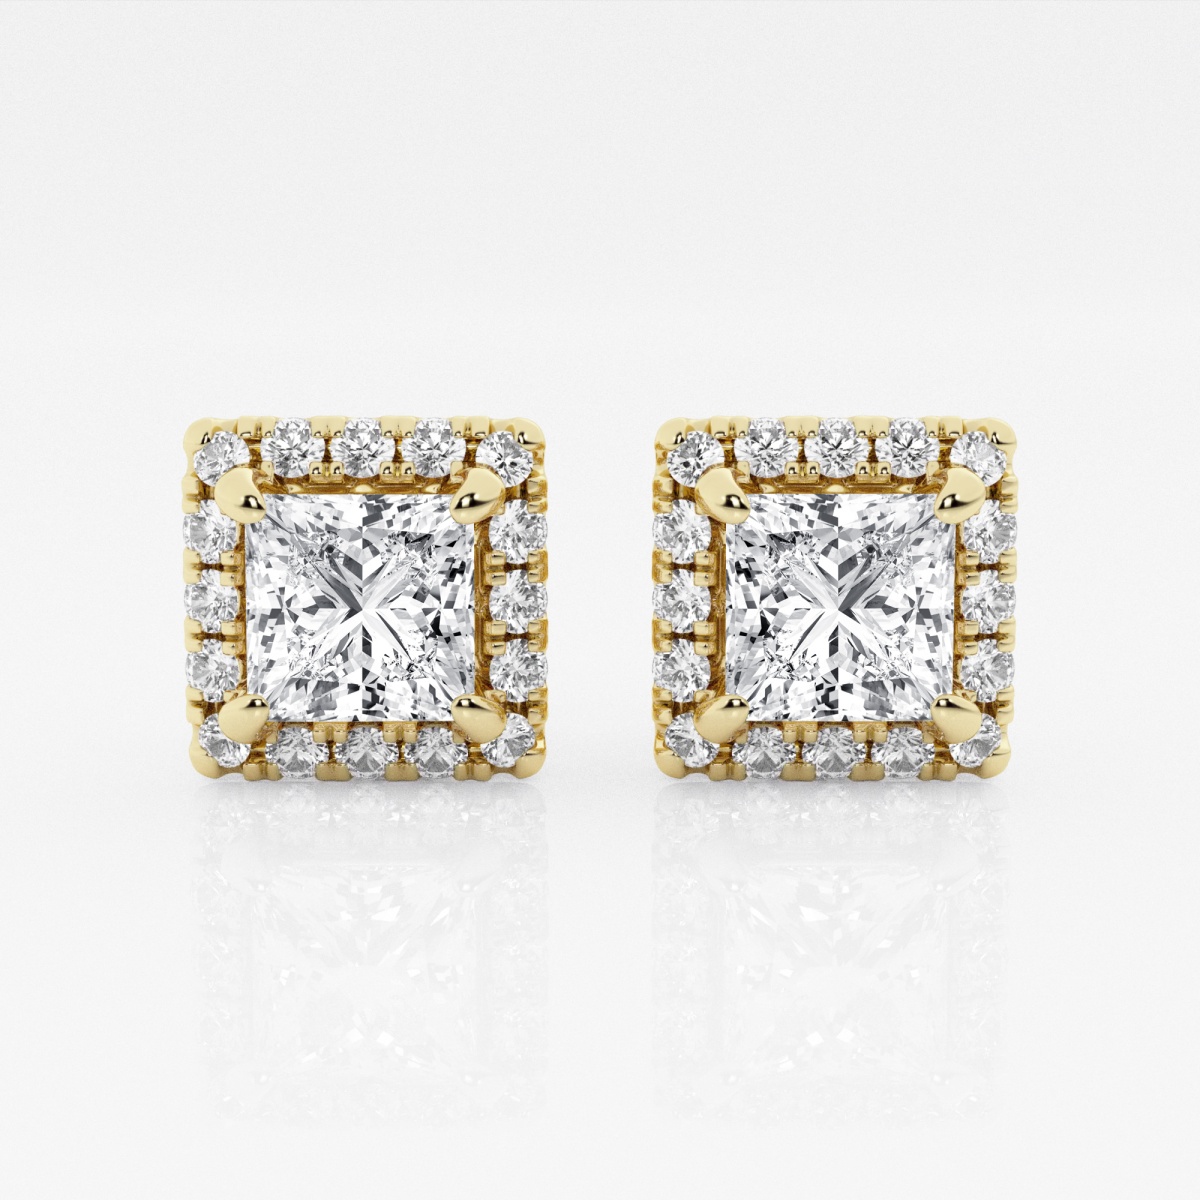 product video for 3 1/2 ctw Princess Lab Grown Diamond Halo Certified Stud Earrings